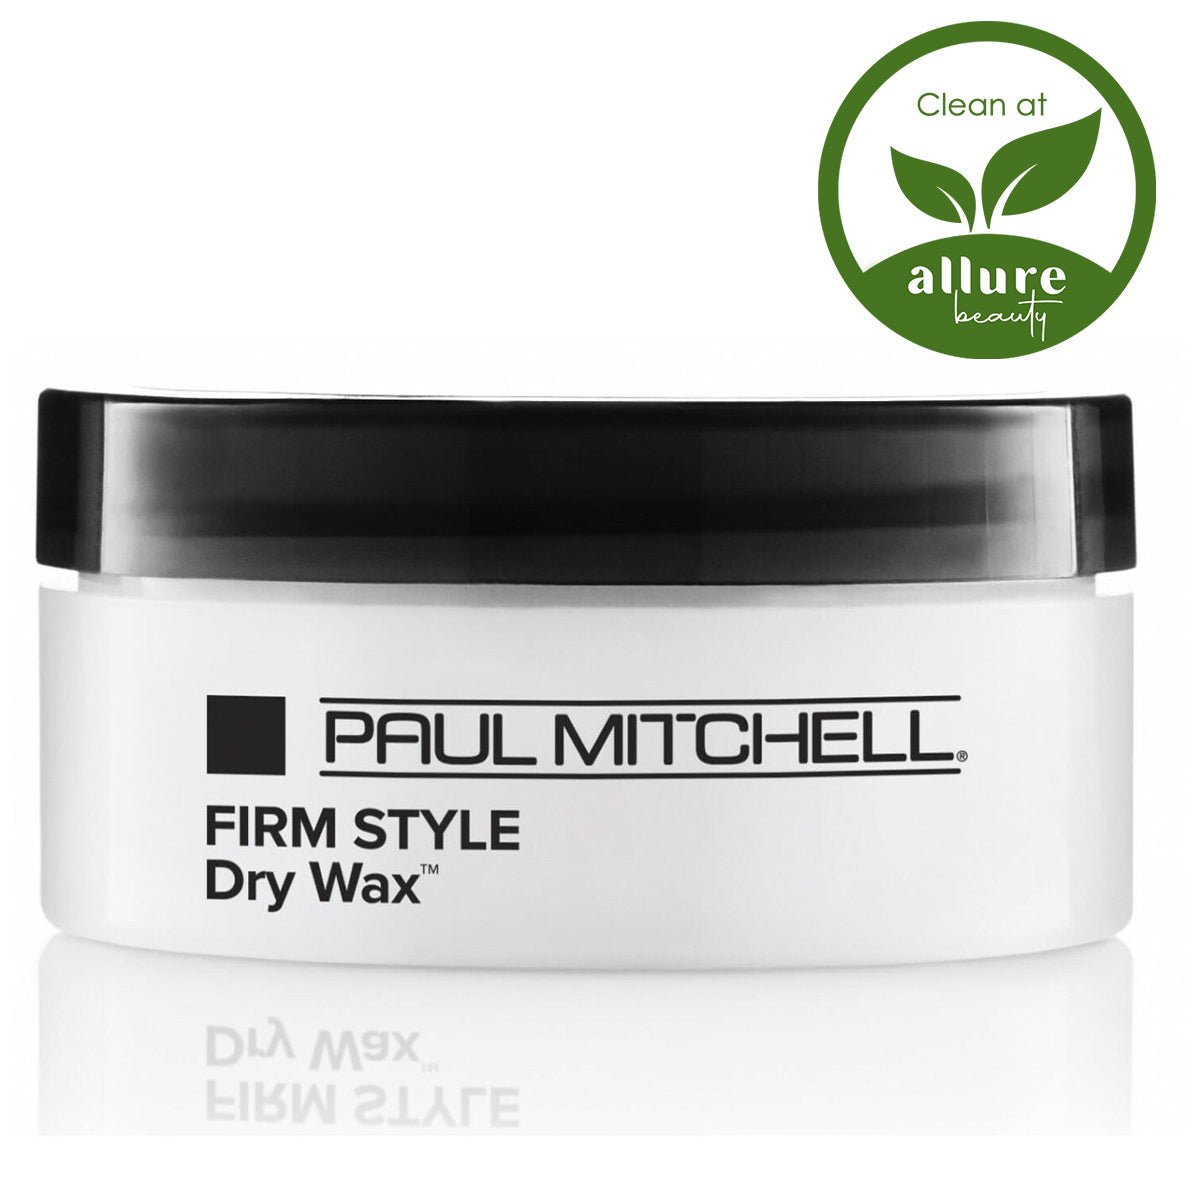 Paul Mitchell Firm Style Dry Wax 50g - AllurebeautypkPaul Mitchell Firm Style Dry Wax 50g